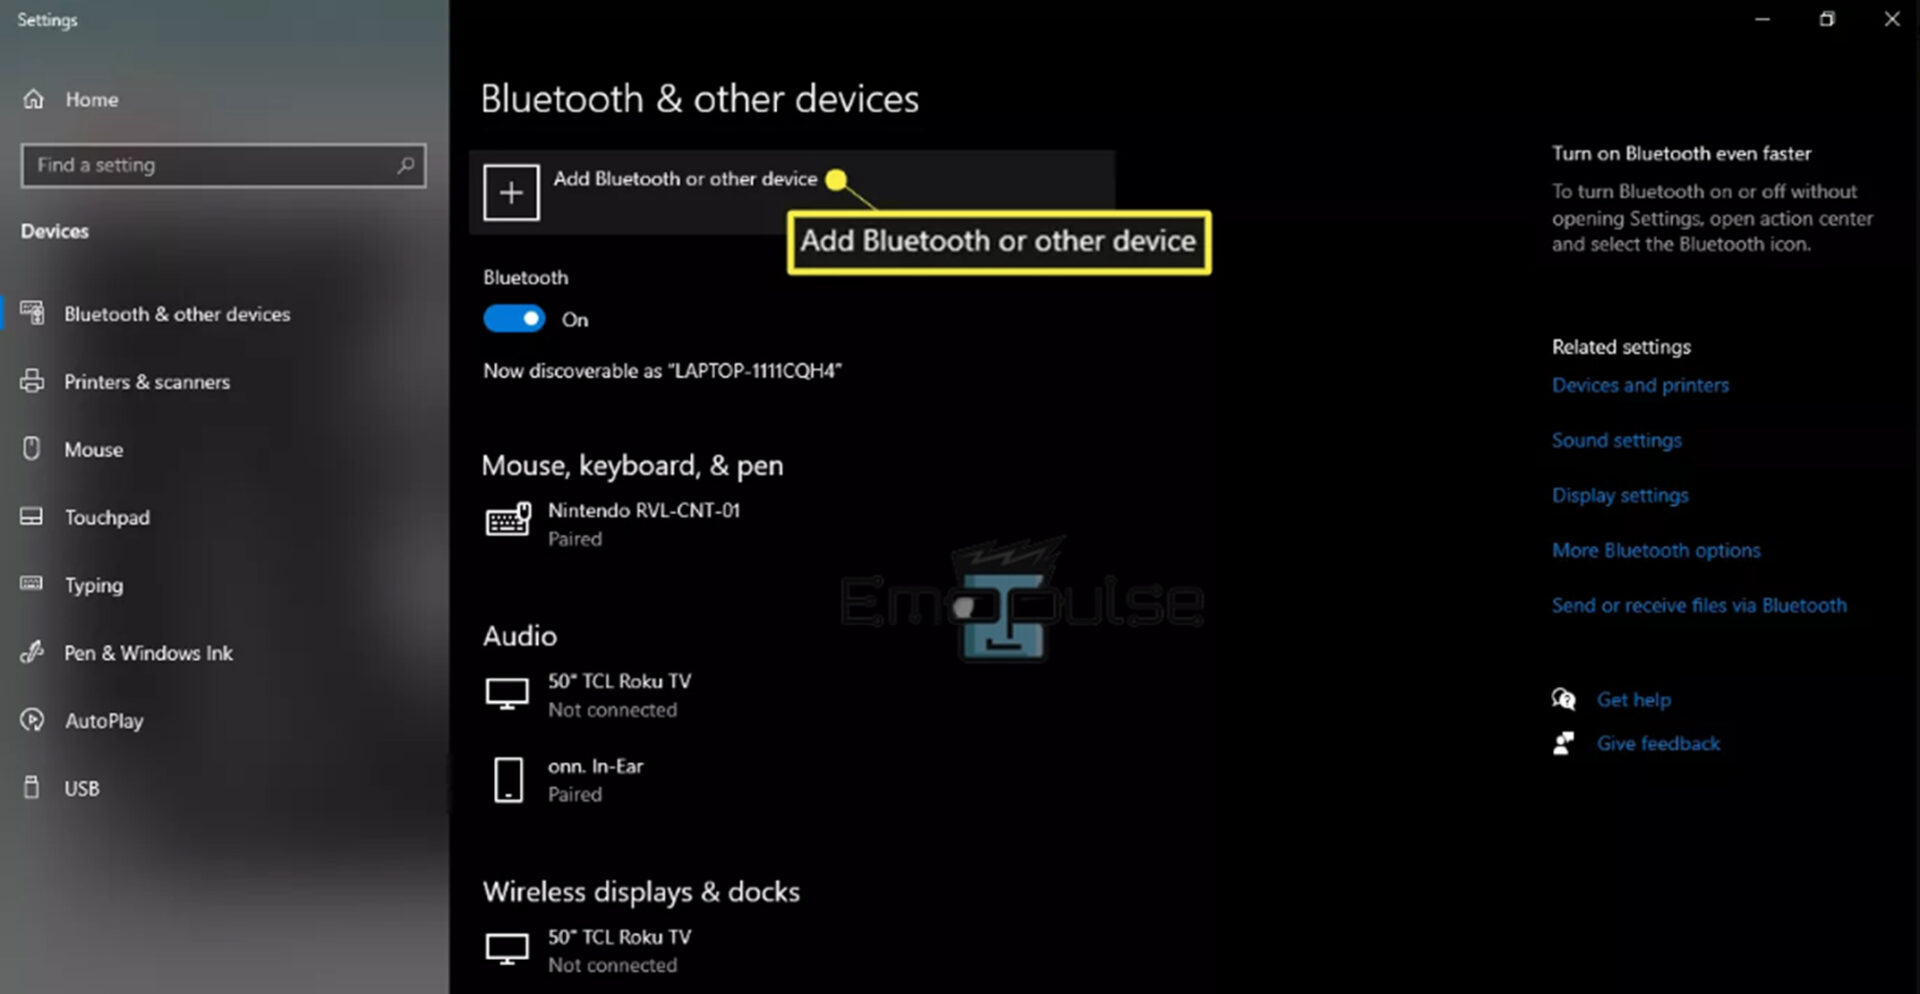 connect PS4 controller to PC via bluetooth